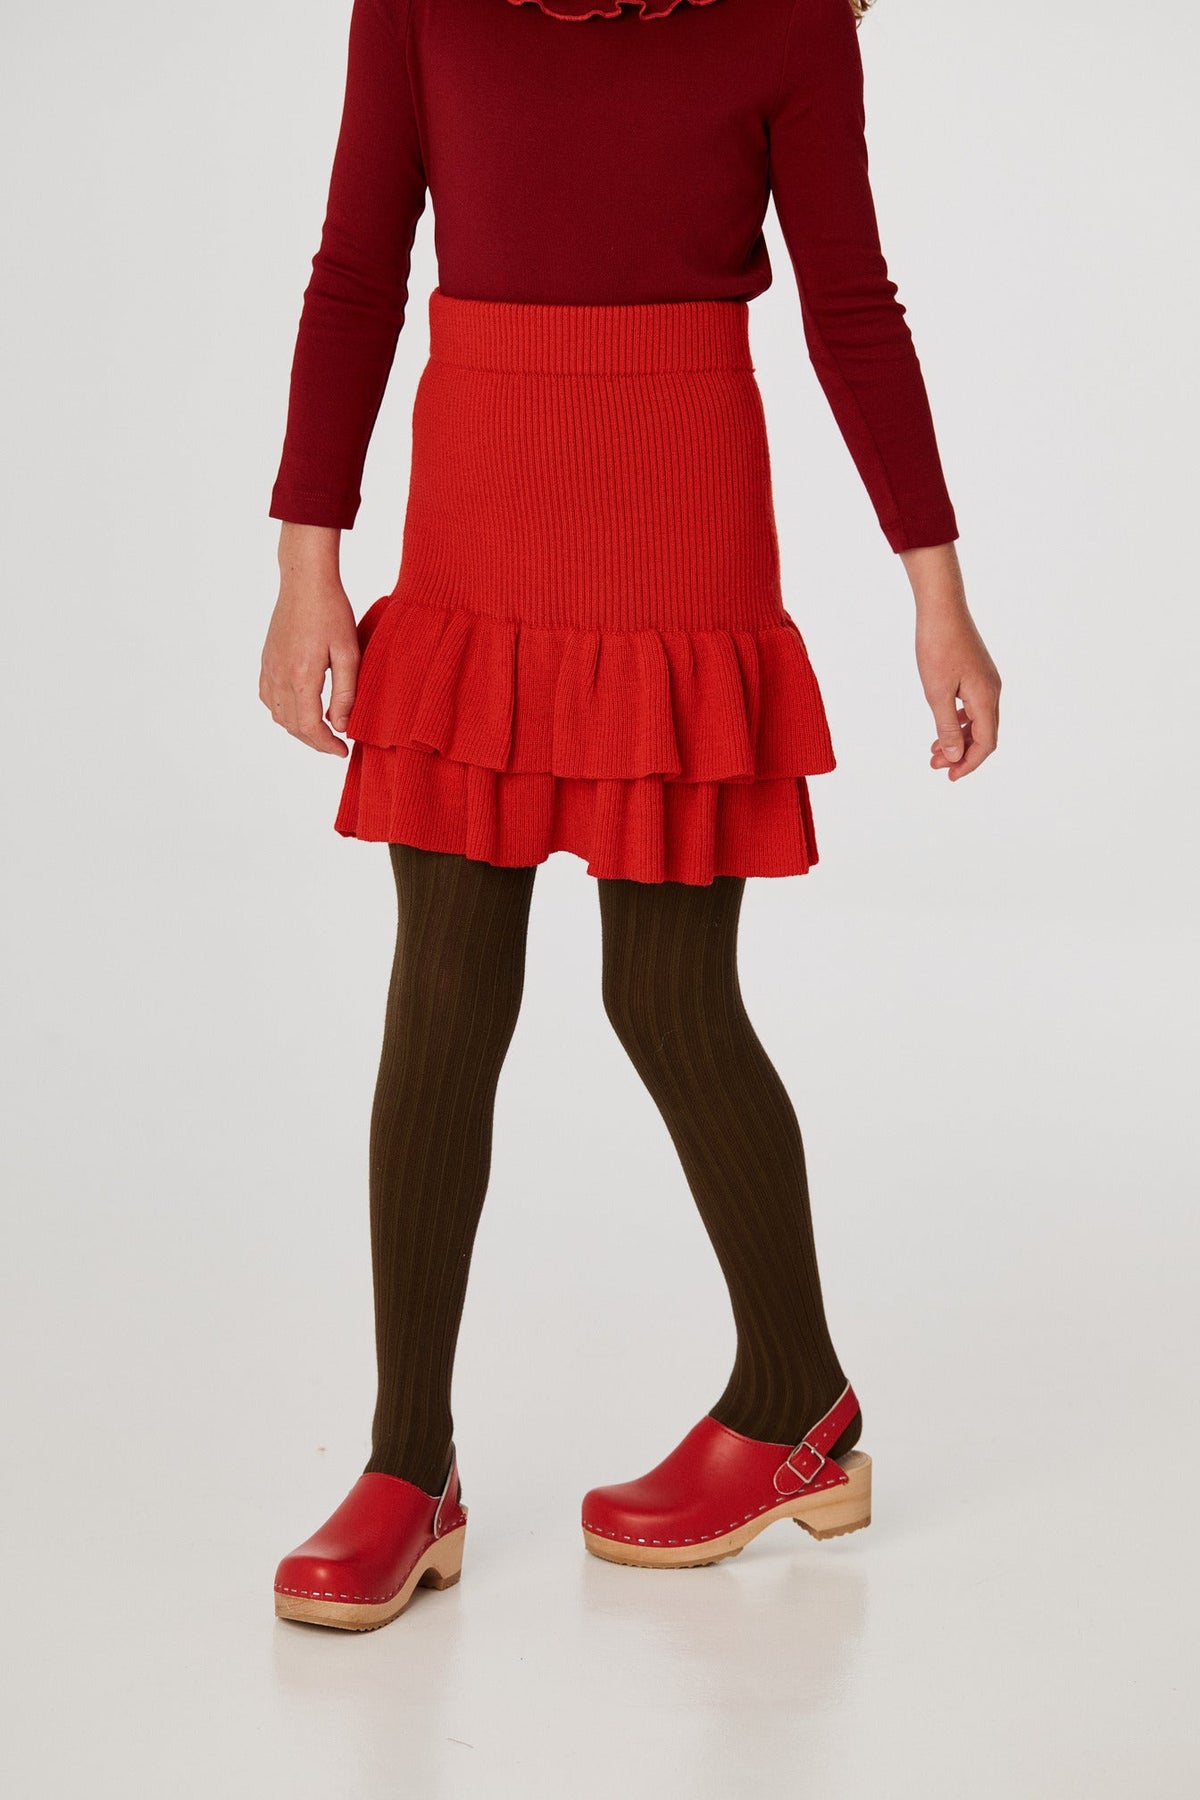 Block Party Skirt - Red Flame+Model is 53 inches tall, 58lbs, wearing a size 7-8y